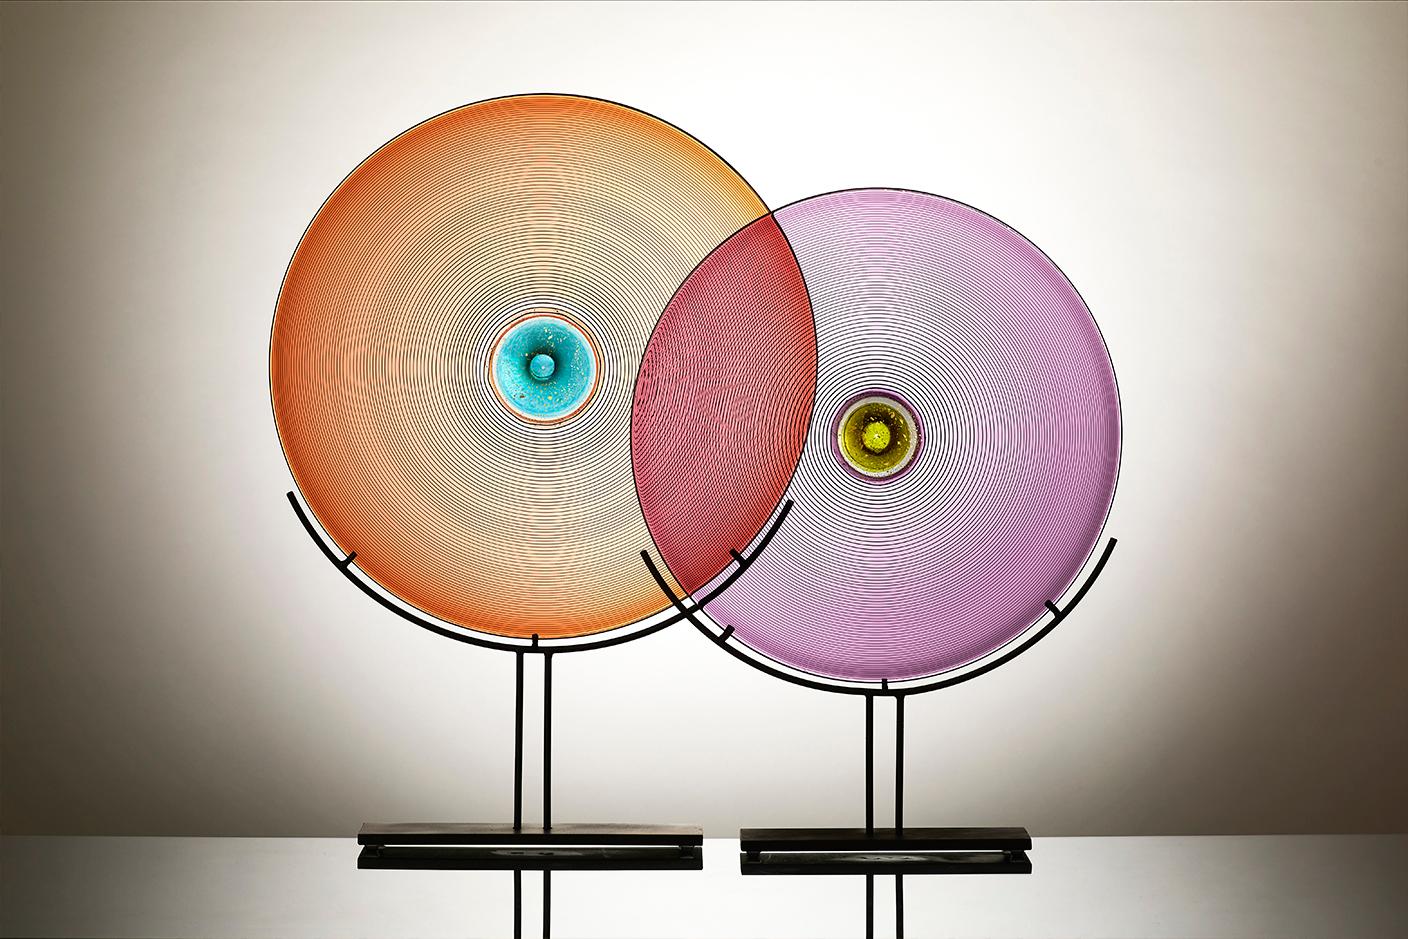 Modern Blown Glass Sculpture, Apricot Disc with Aqua and Gold, by Vetro Vero - In Stock